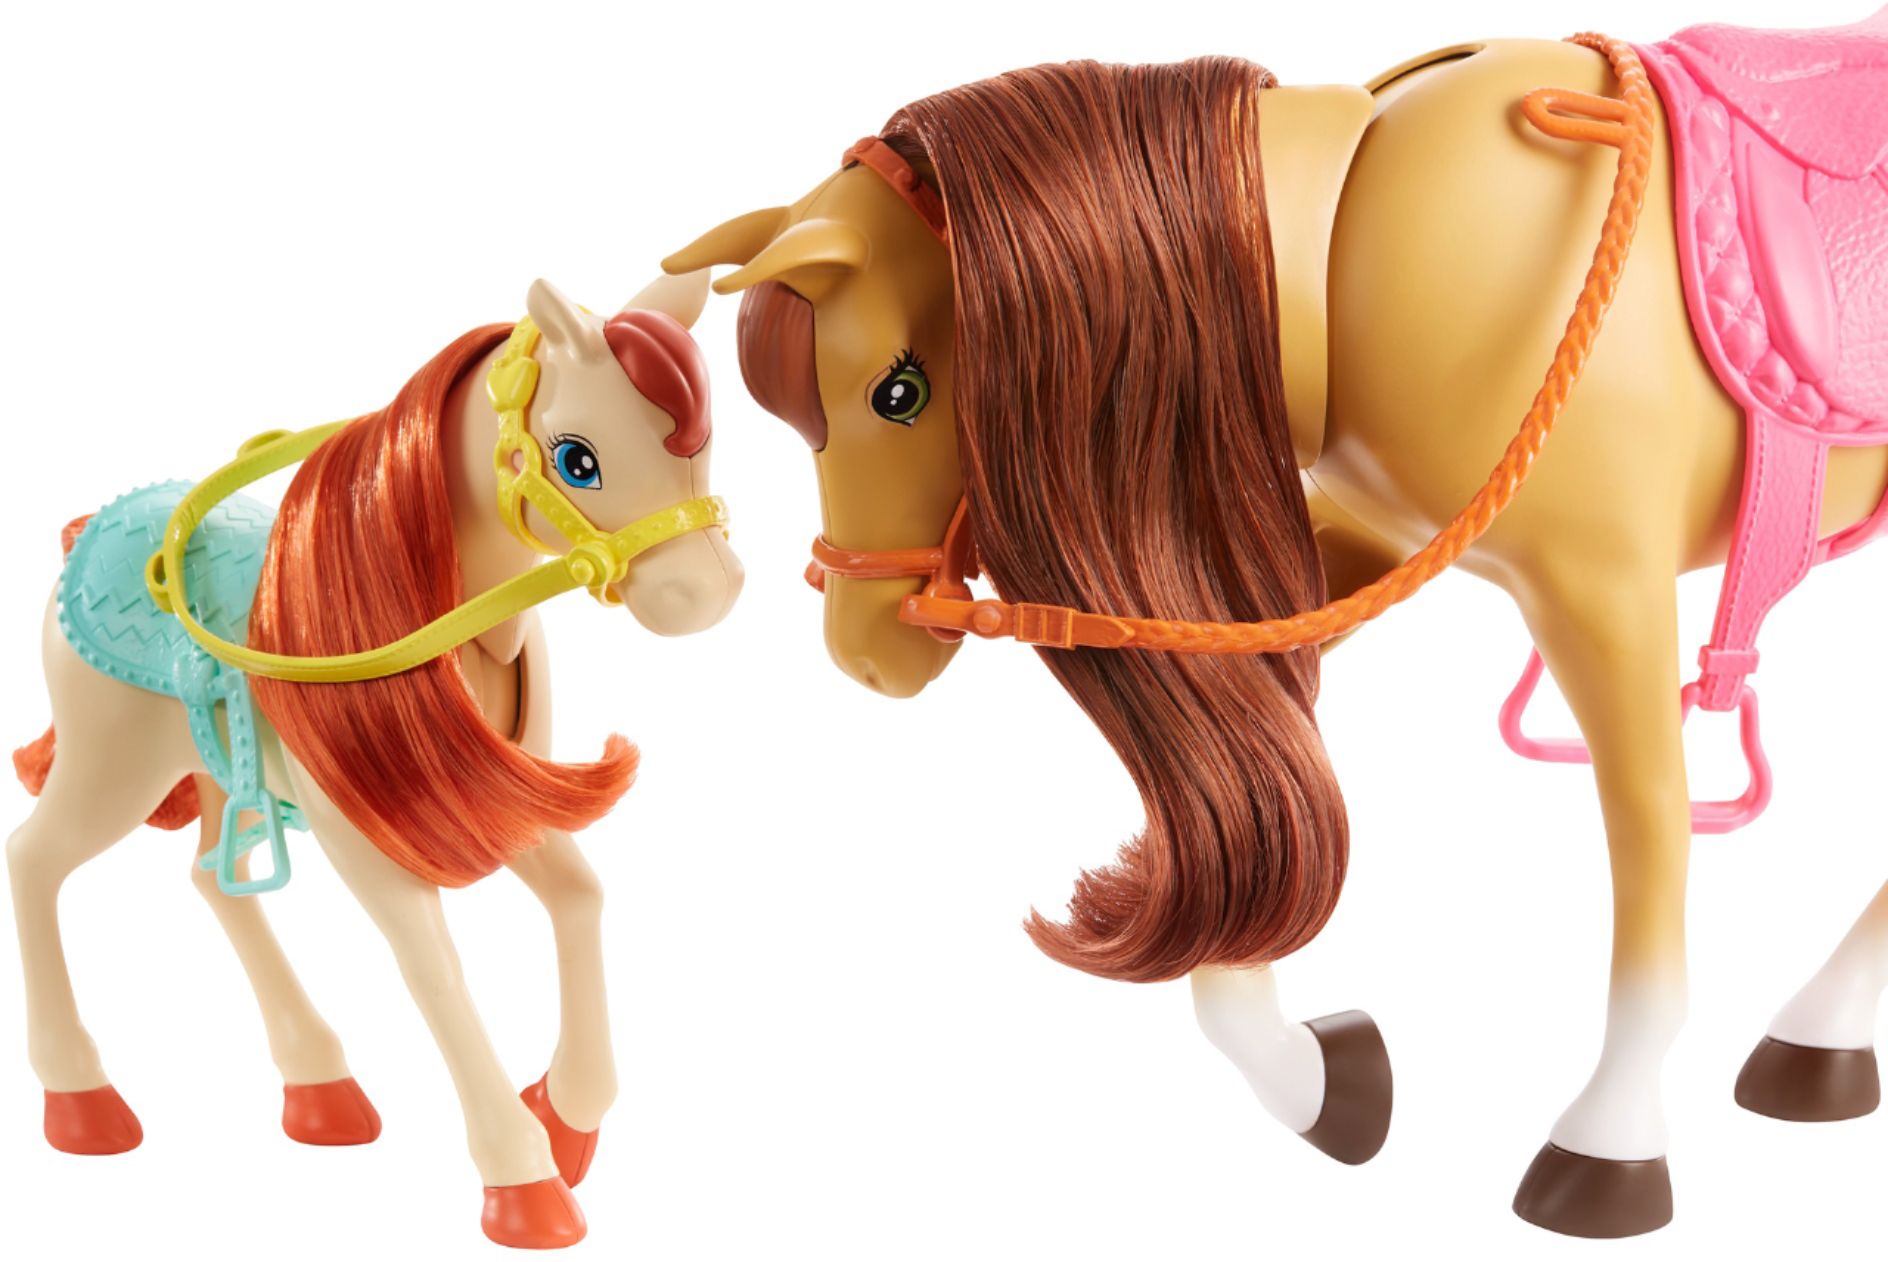 barbie dolls with horses